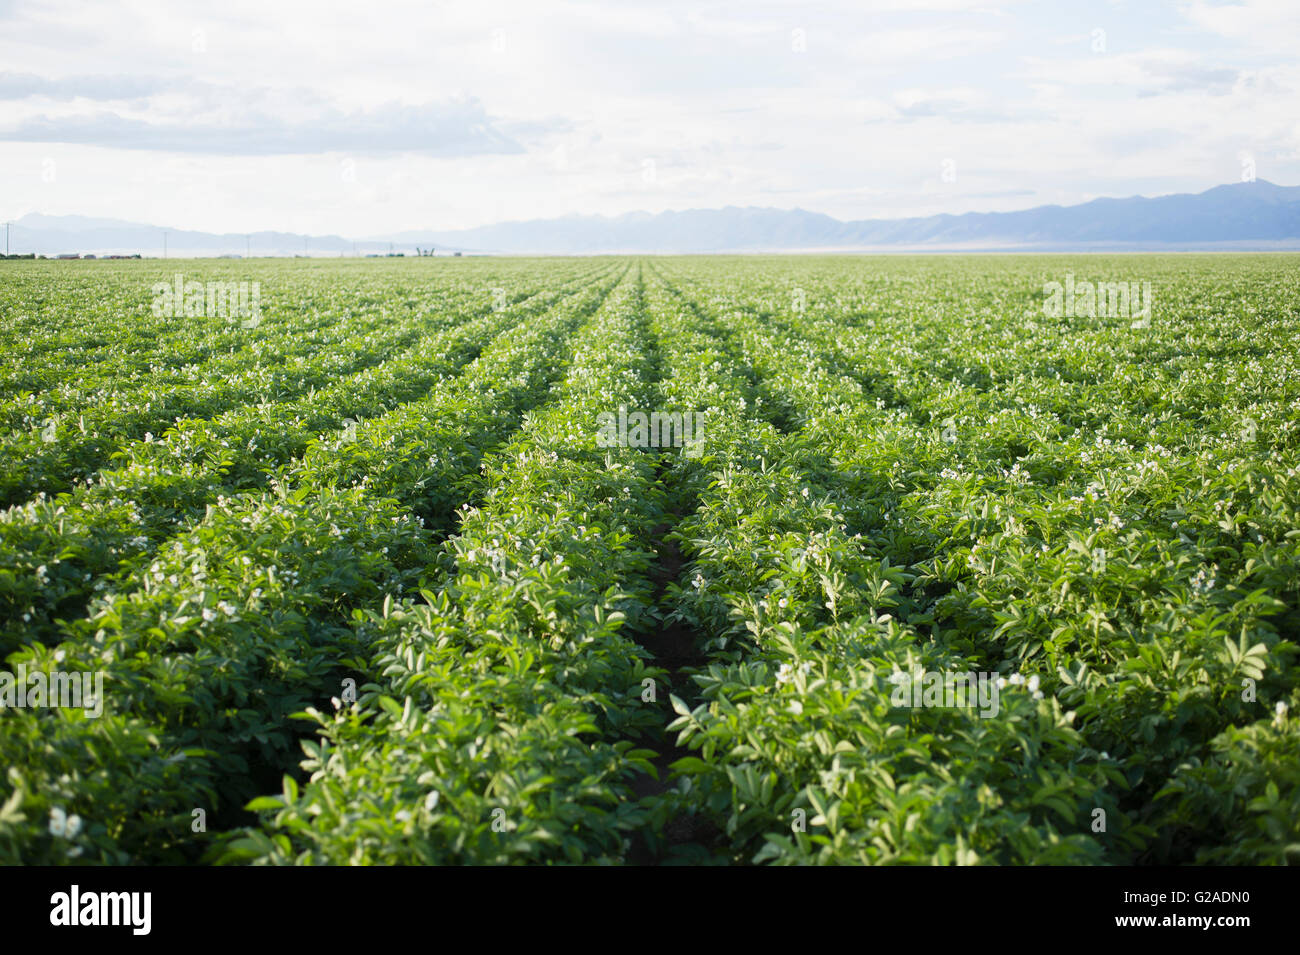 Field with rows of potato plants Stock Photo